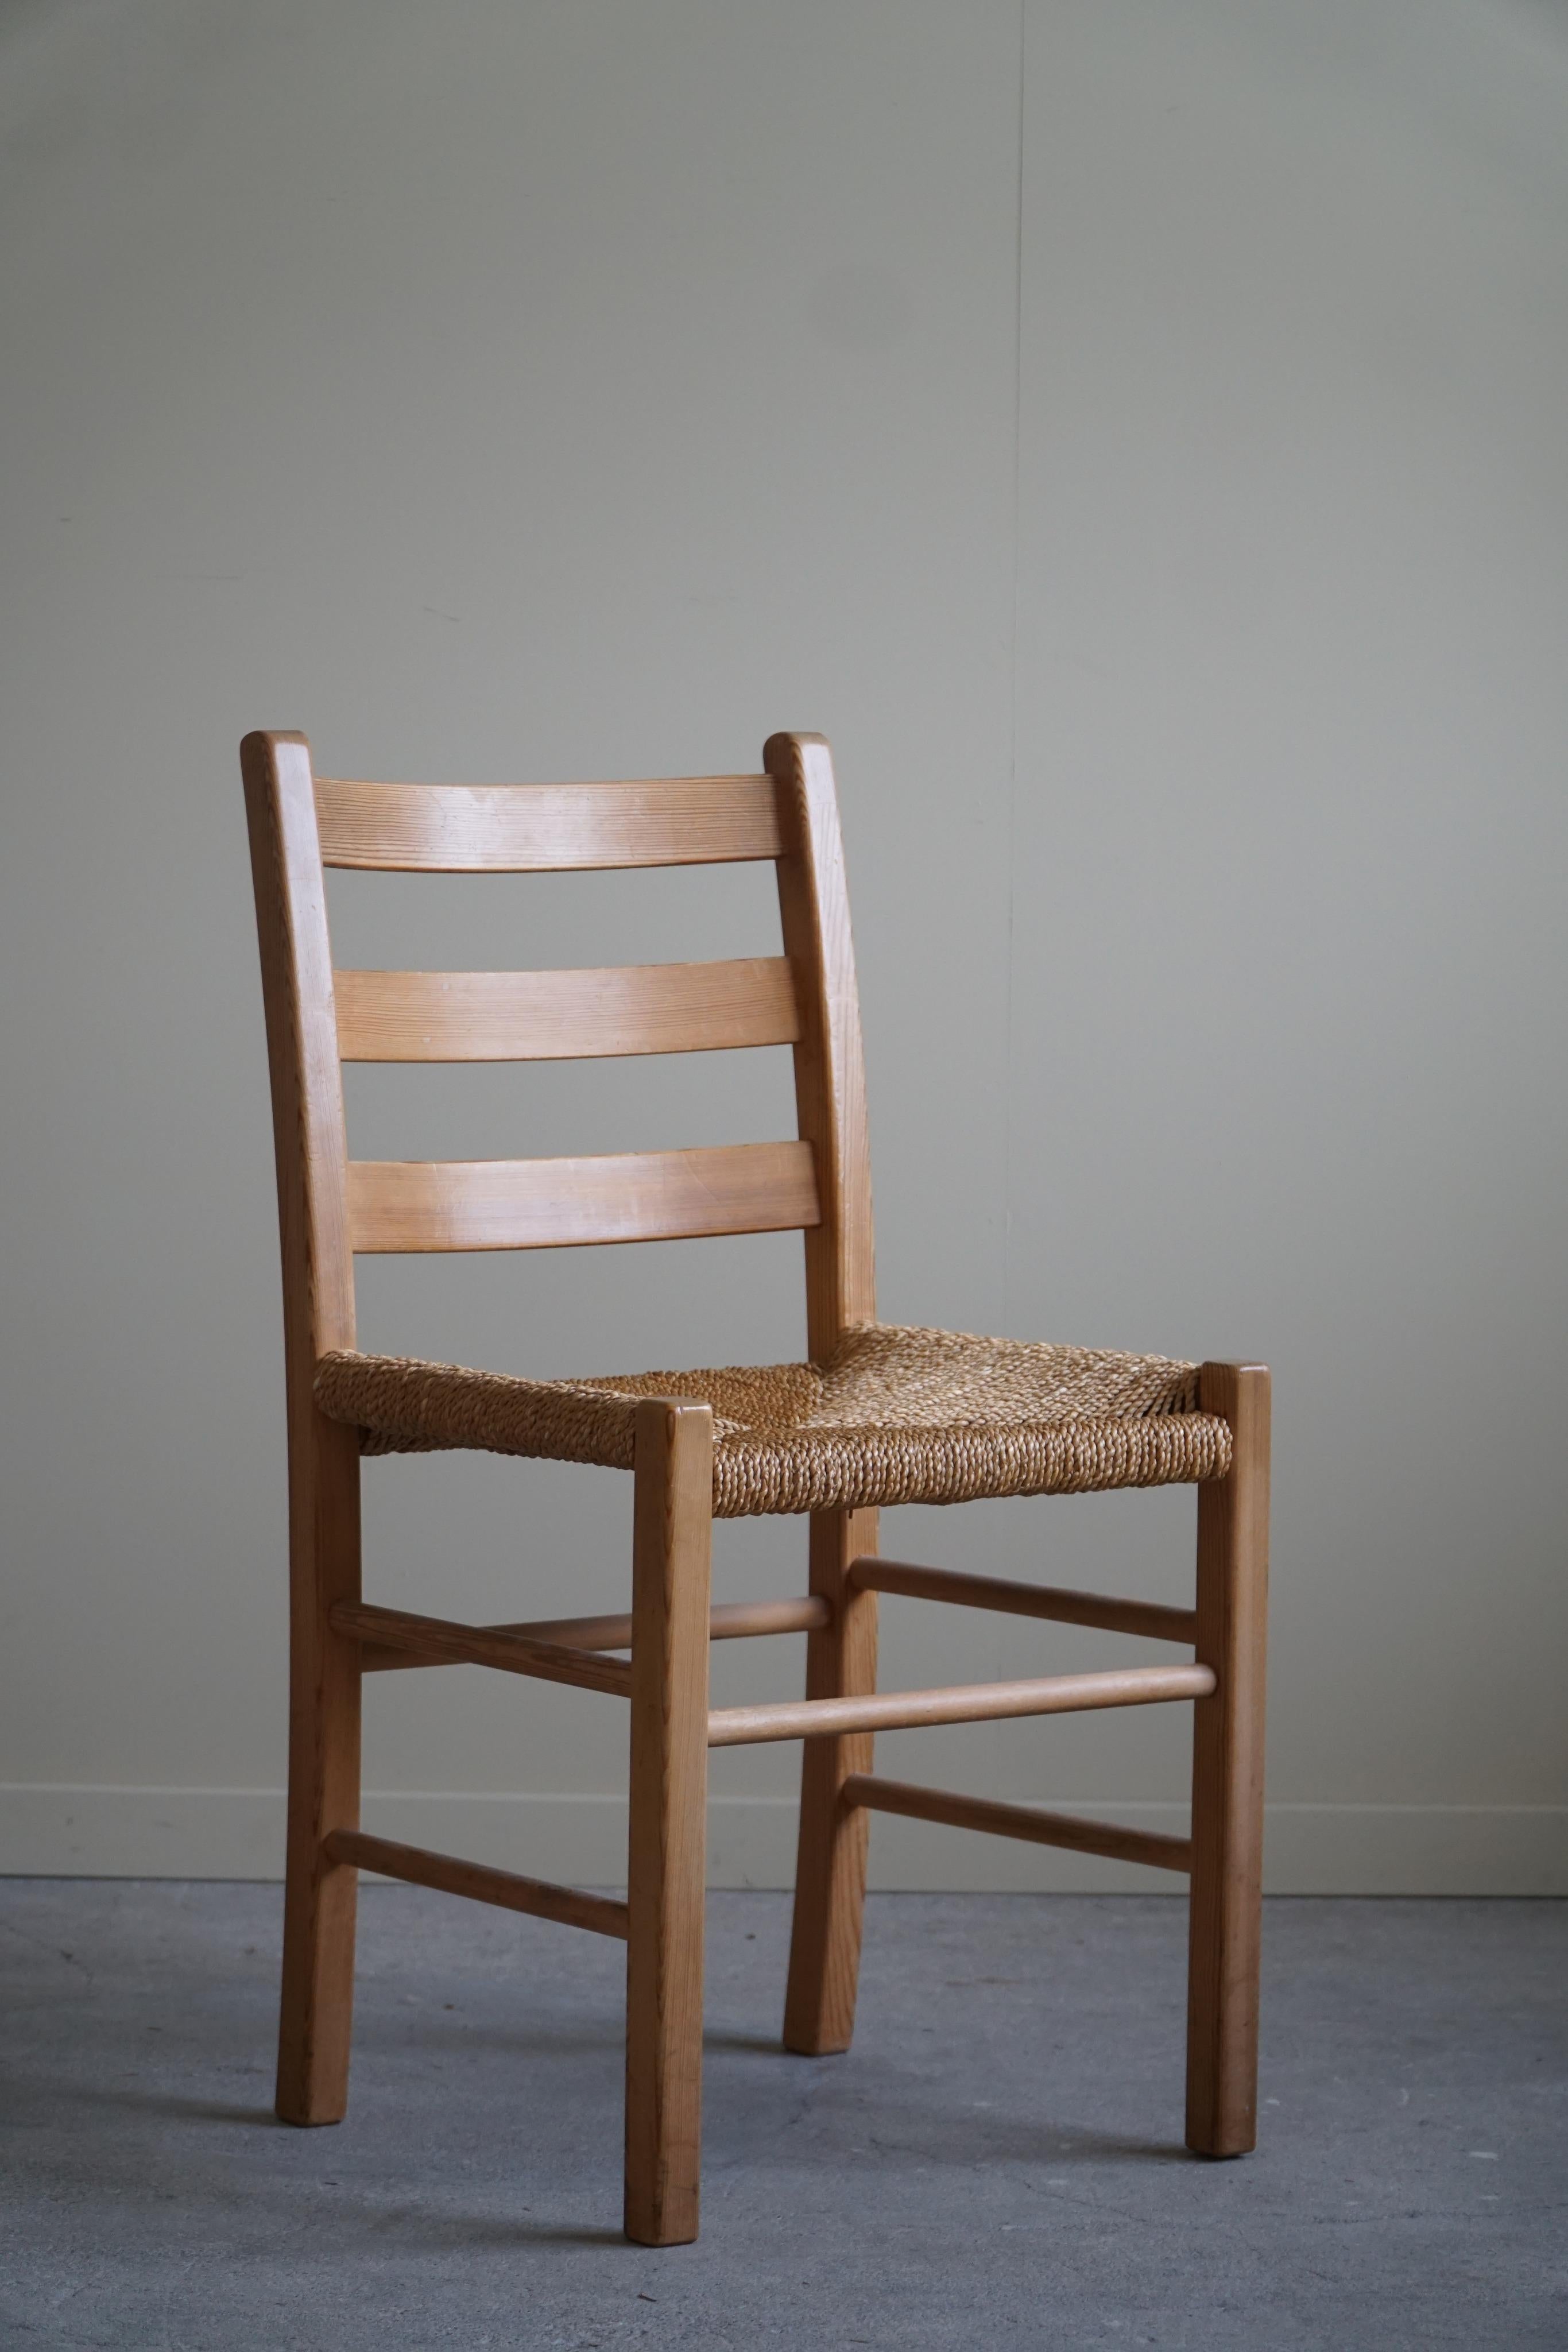 Set of 10 Dining Chairs in Pine & Seagrass Seats, Danish Mid Century, 1960s For Sale 7